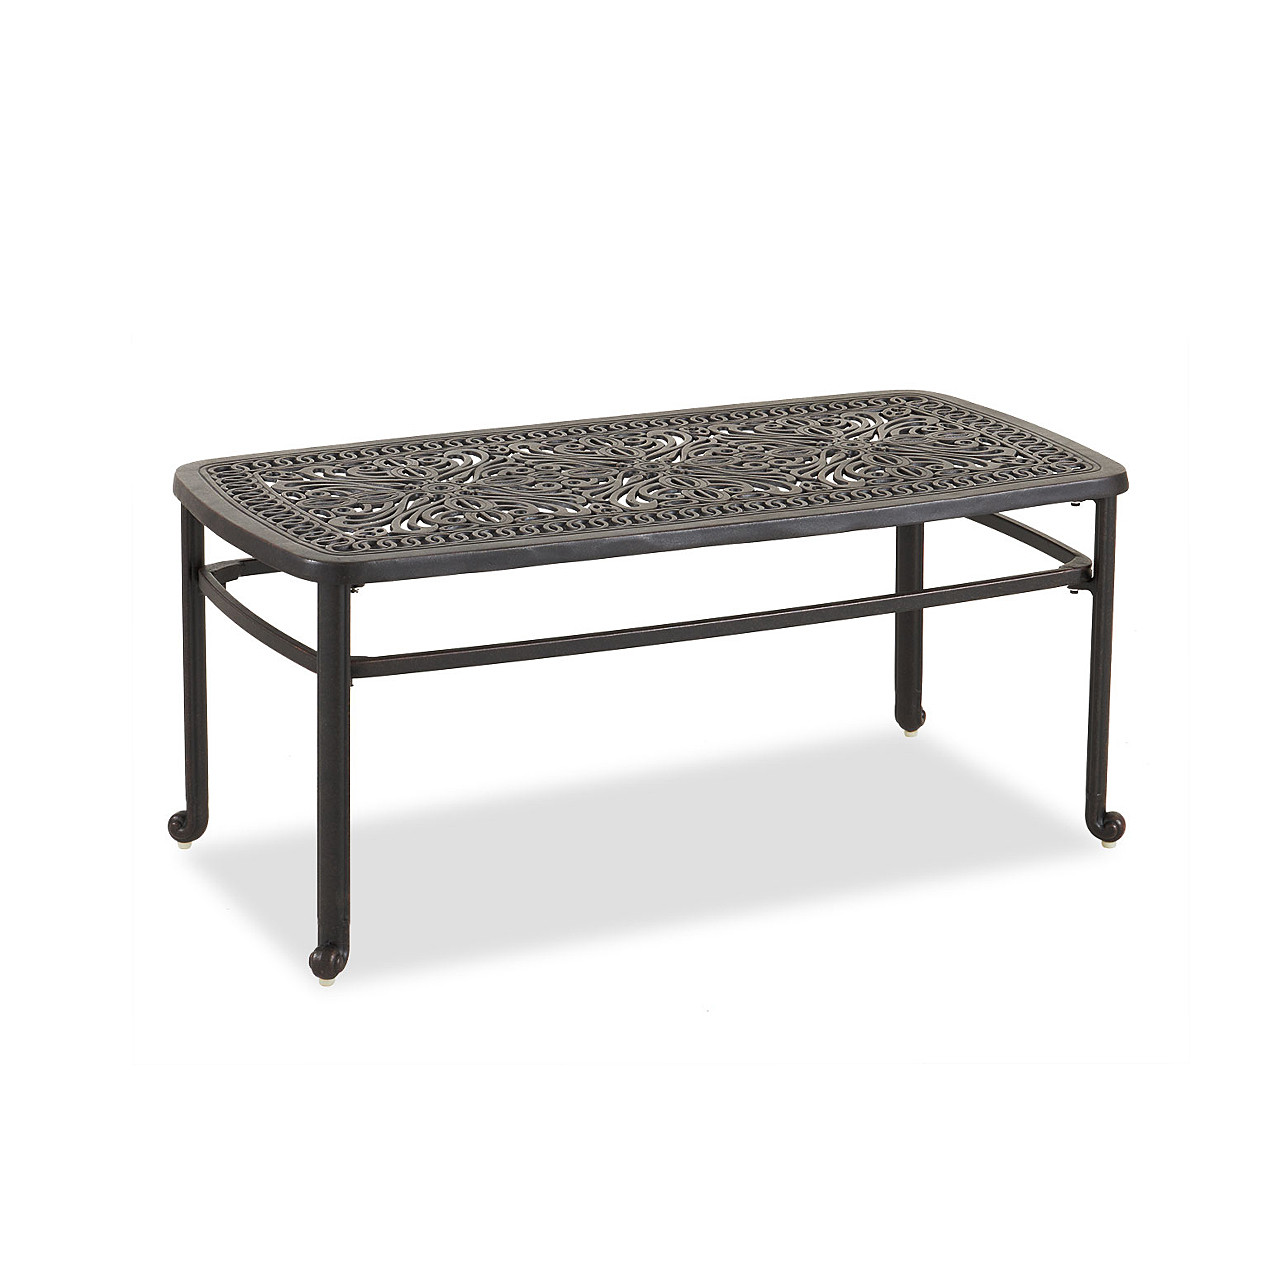 Verona Desert Bronze Cast Aluminum with Cushions 4 Piece Loveseat Group + 42 x 21 in. Coffee Table